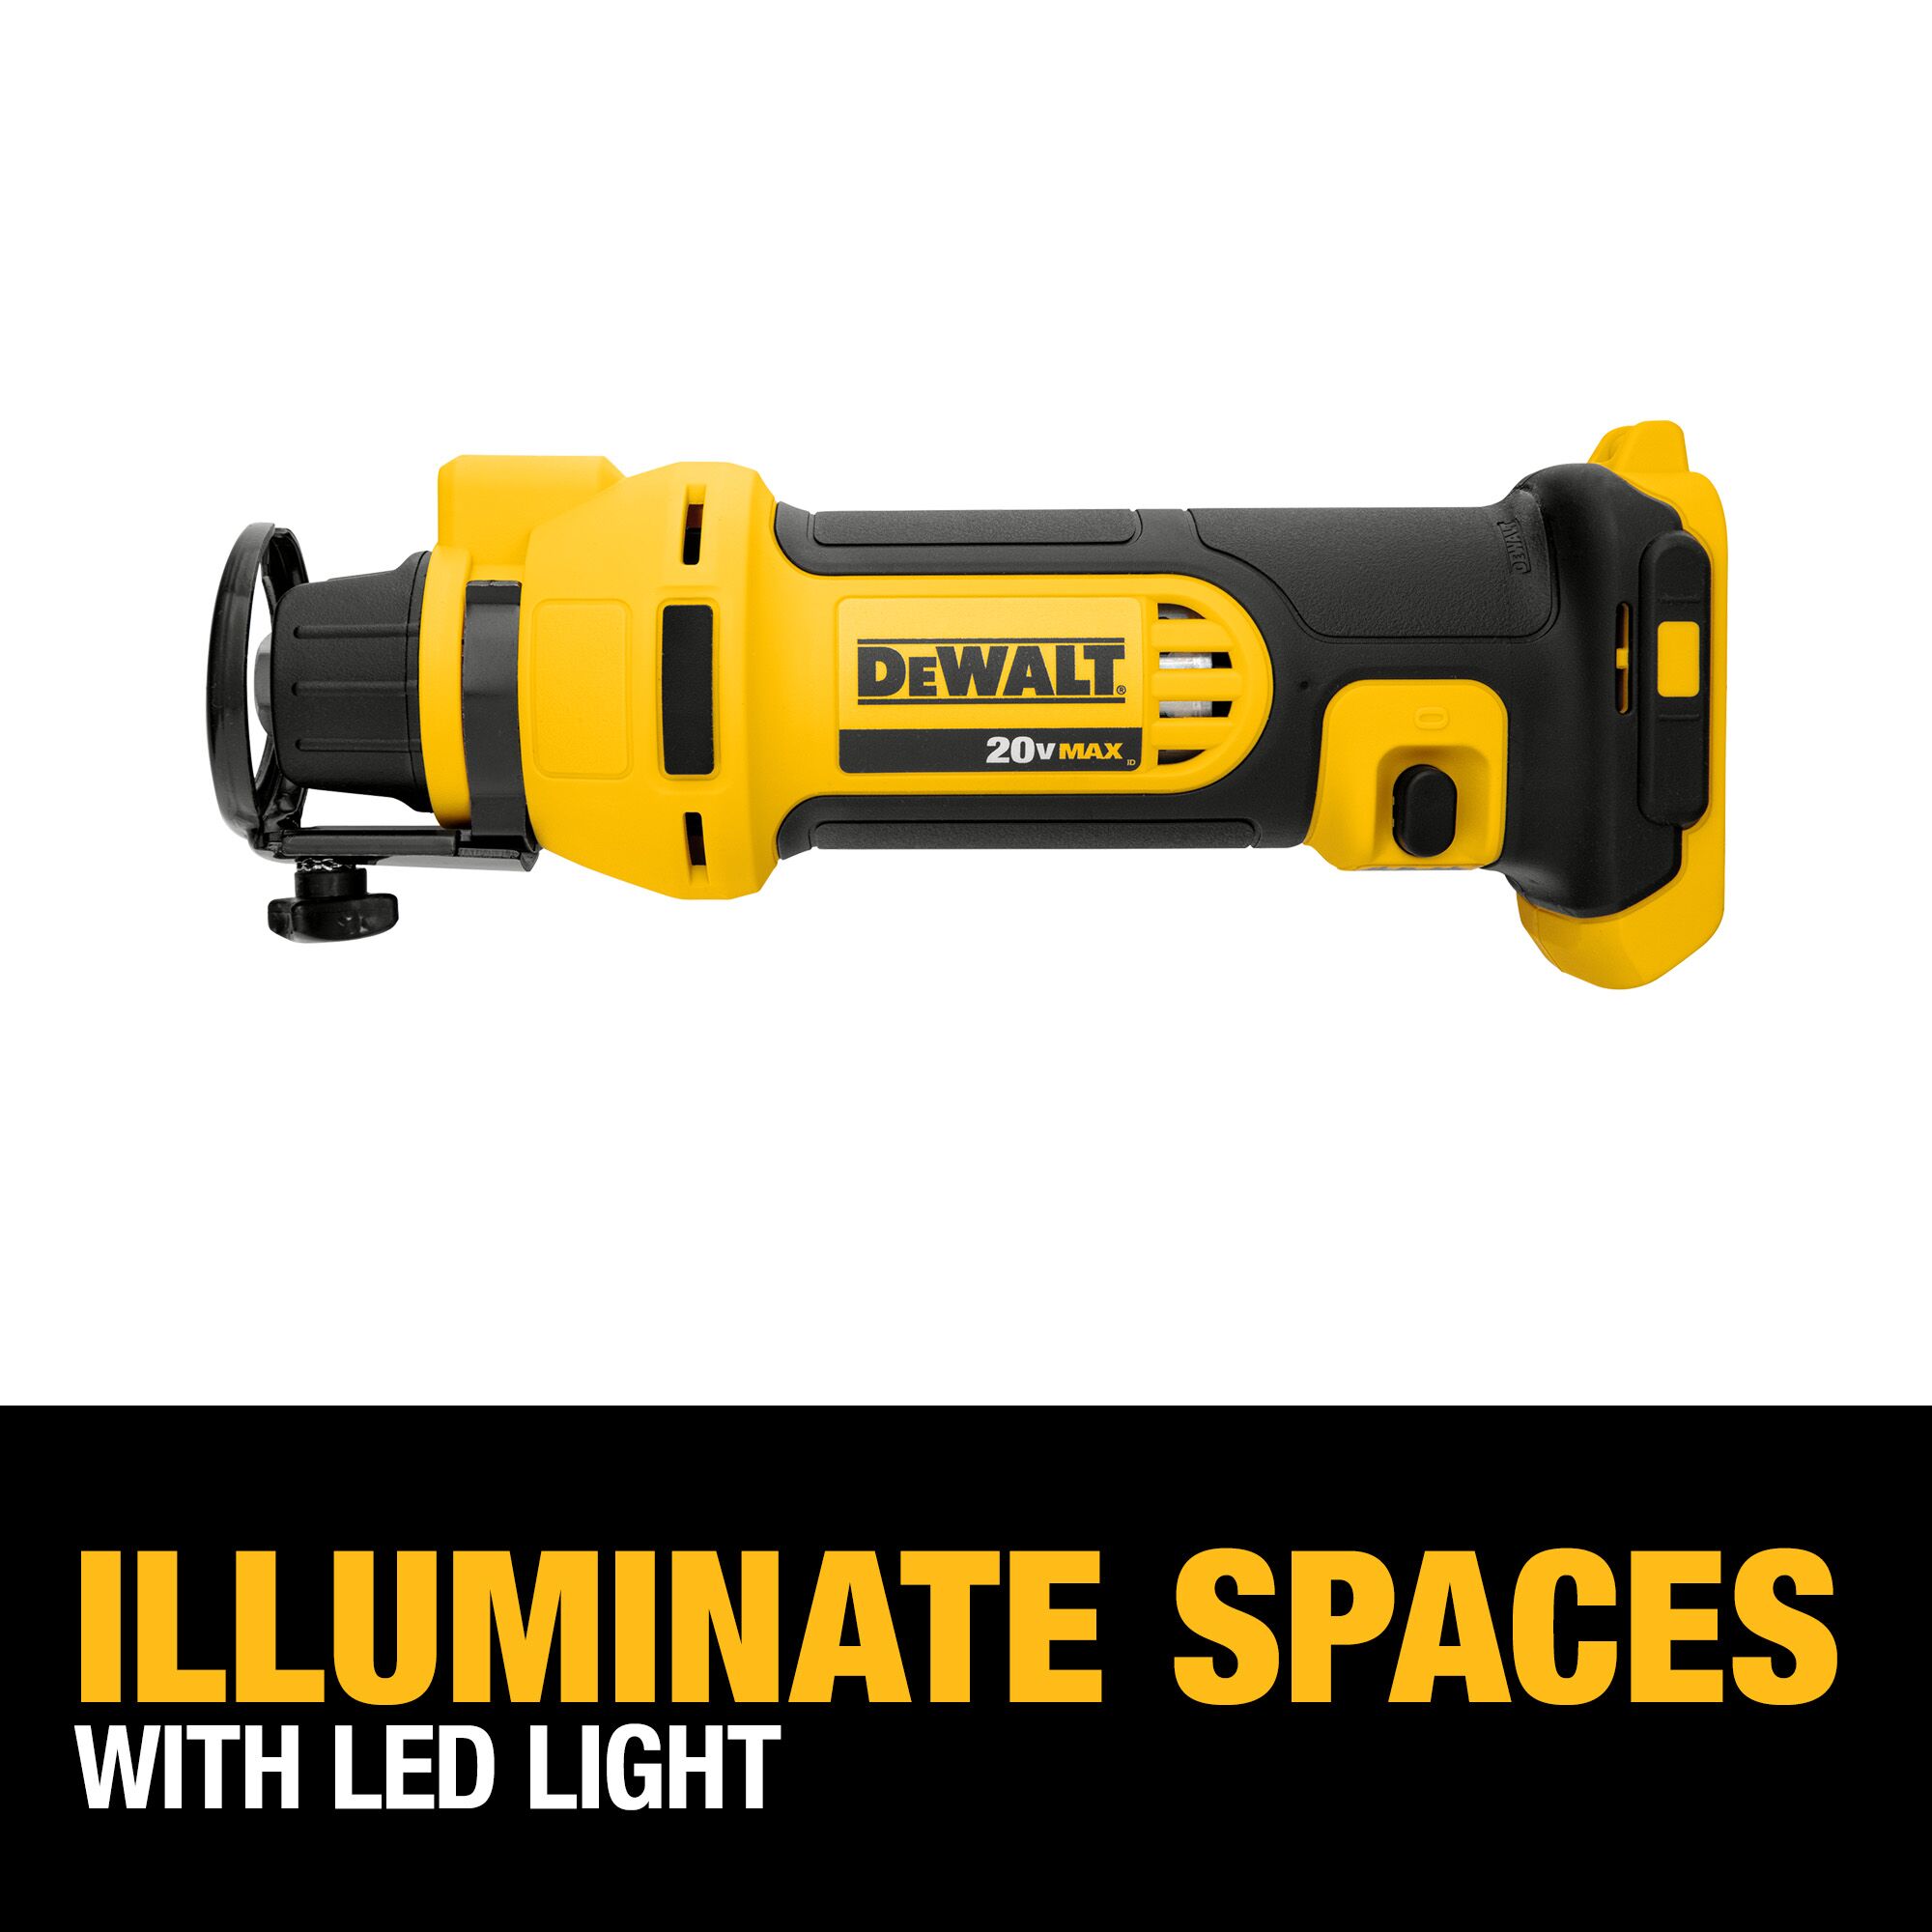 DEWALT 1-speed Cordless 20-volt Max Cutting Rotary Tool in the 